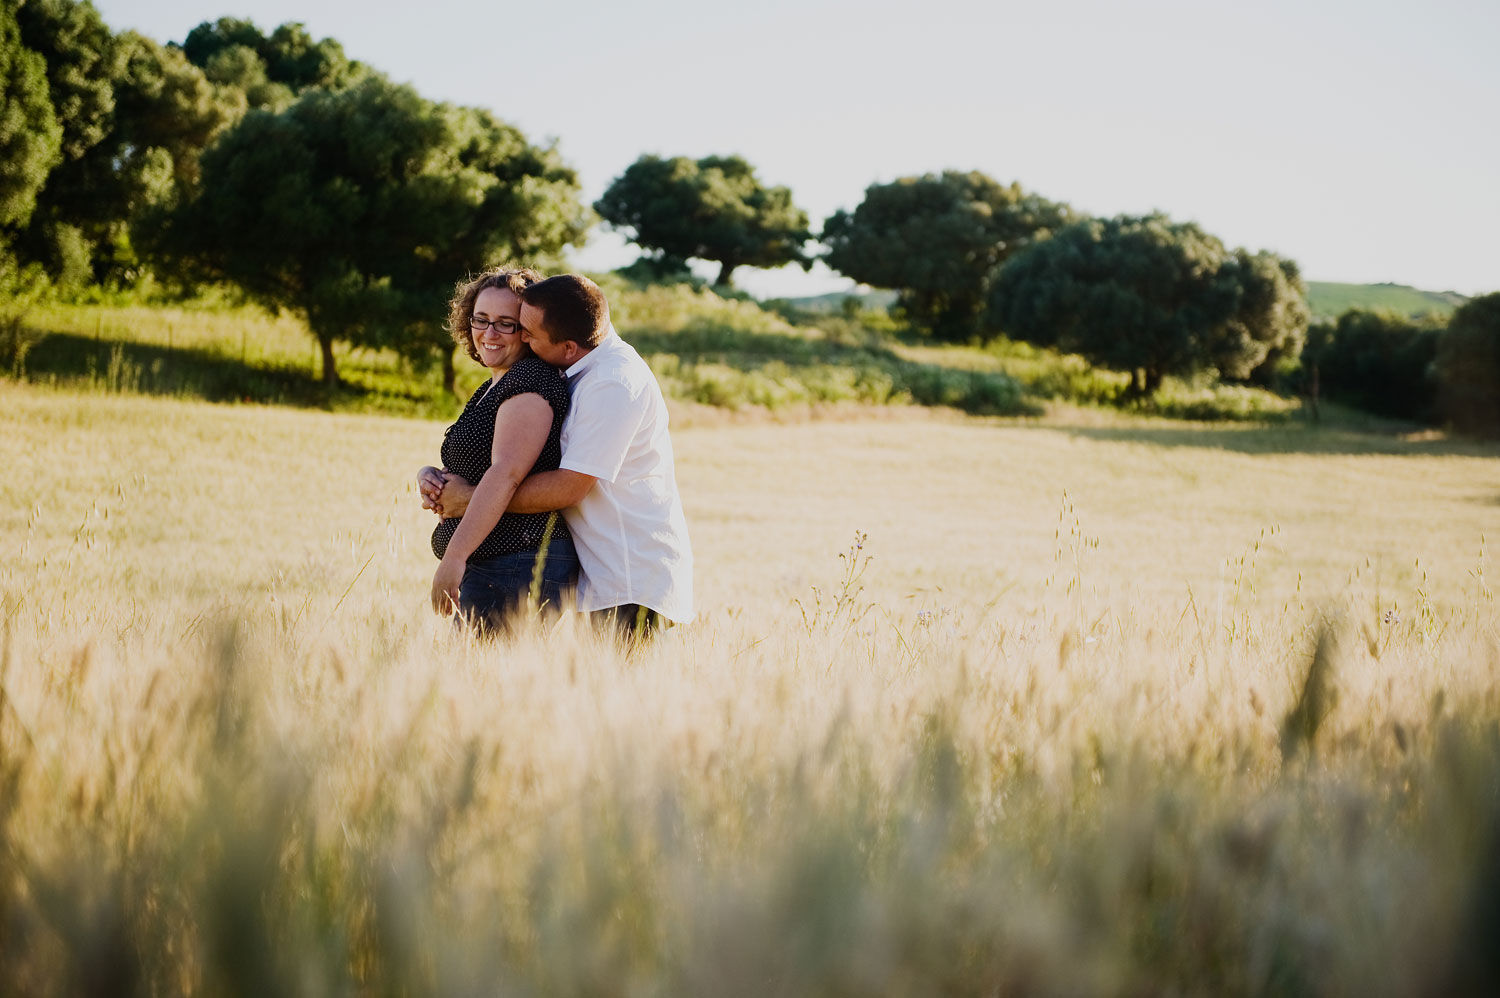 Engagement photos in Vejer